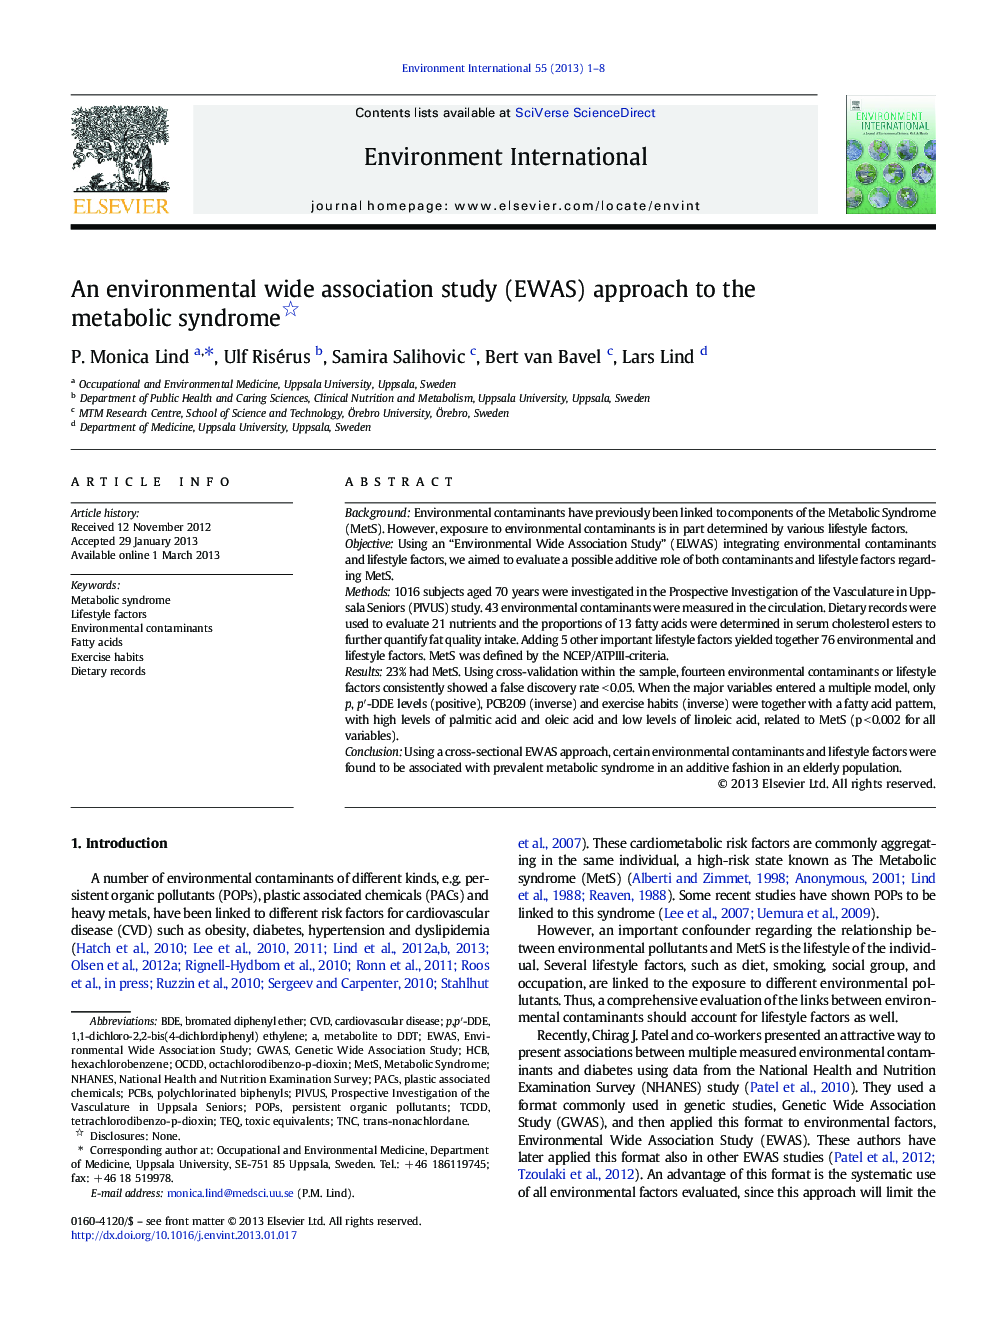 An environmental wide association study (EWAS) approach to the metabolic syndrome